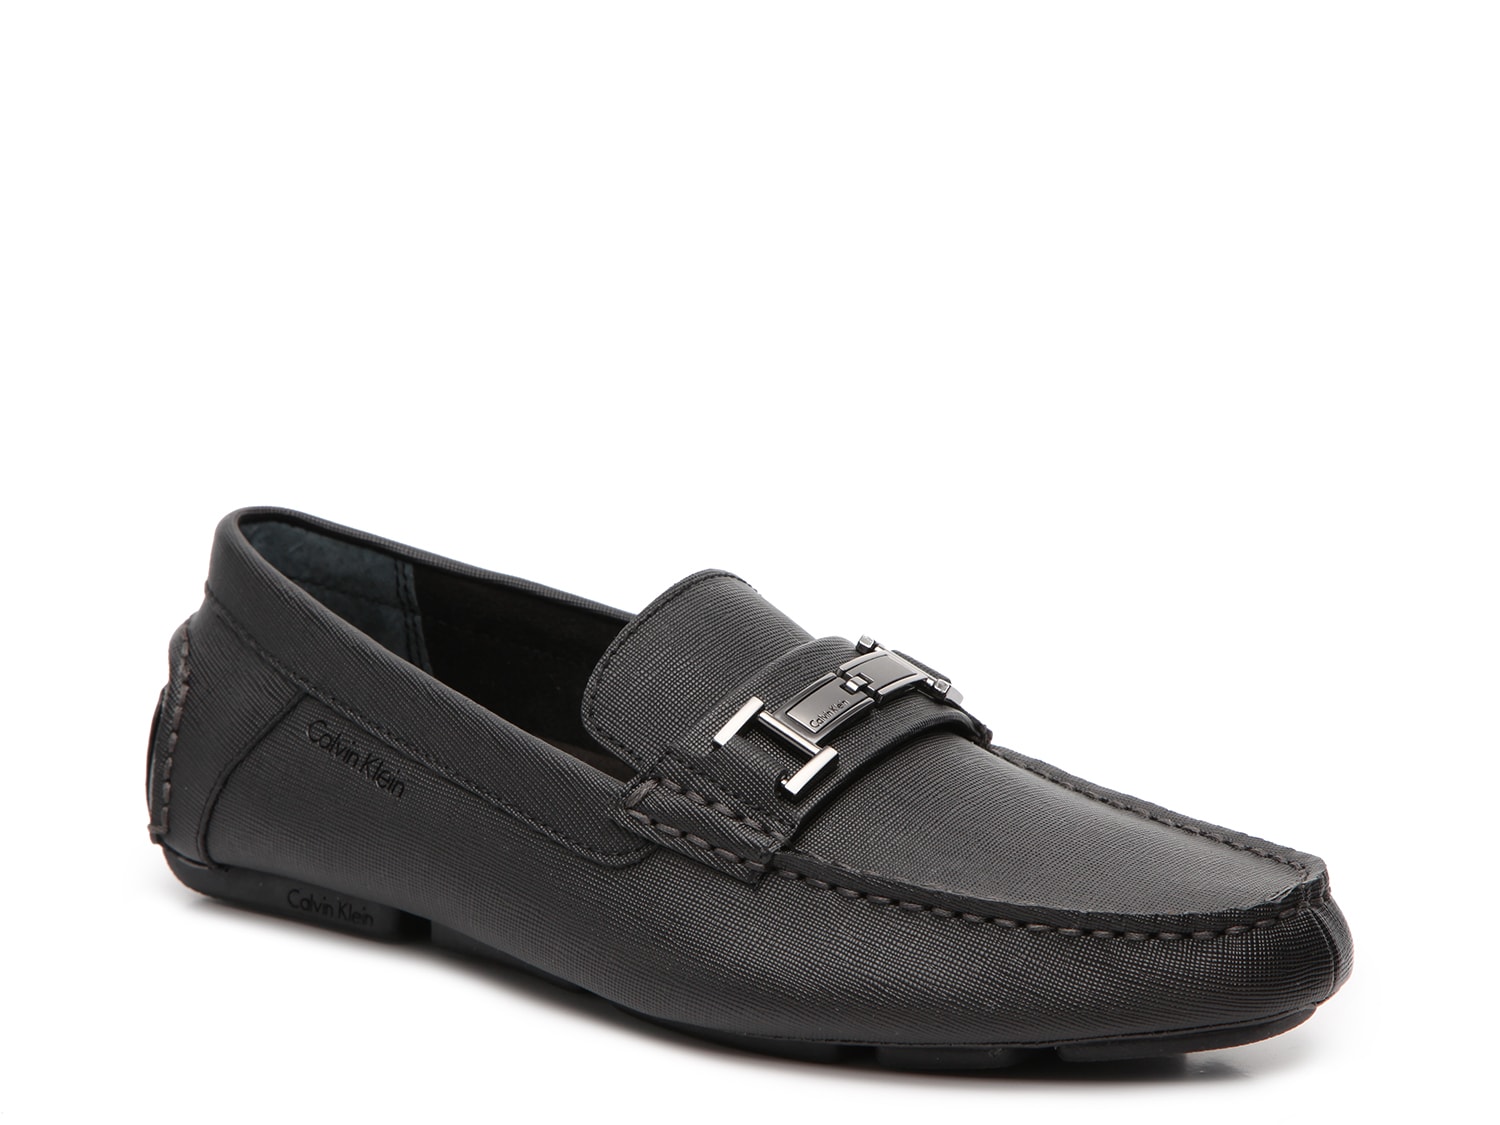 mens casual loafers size 14